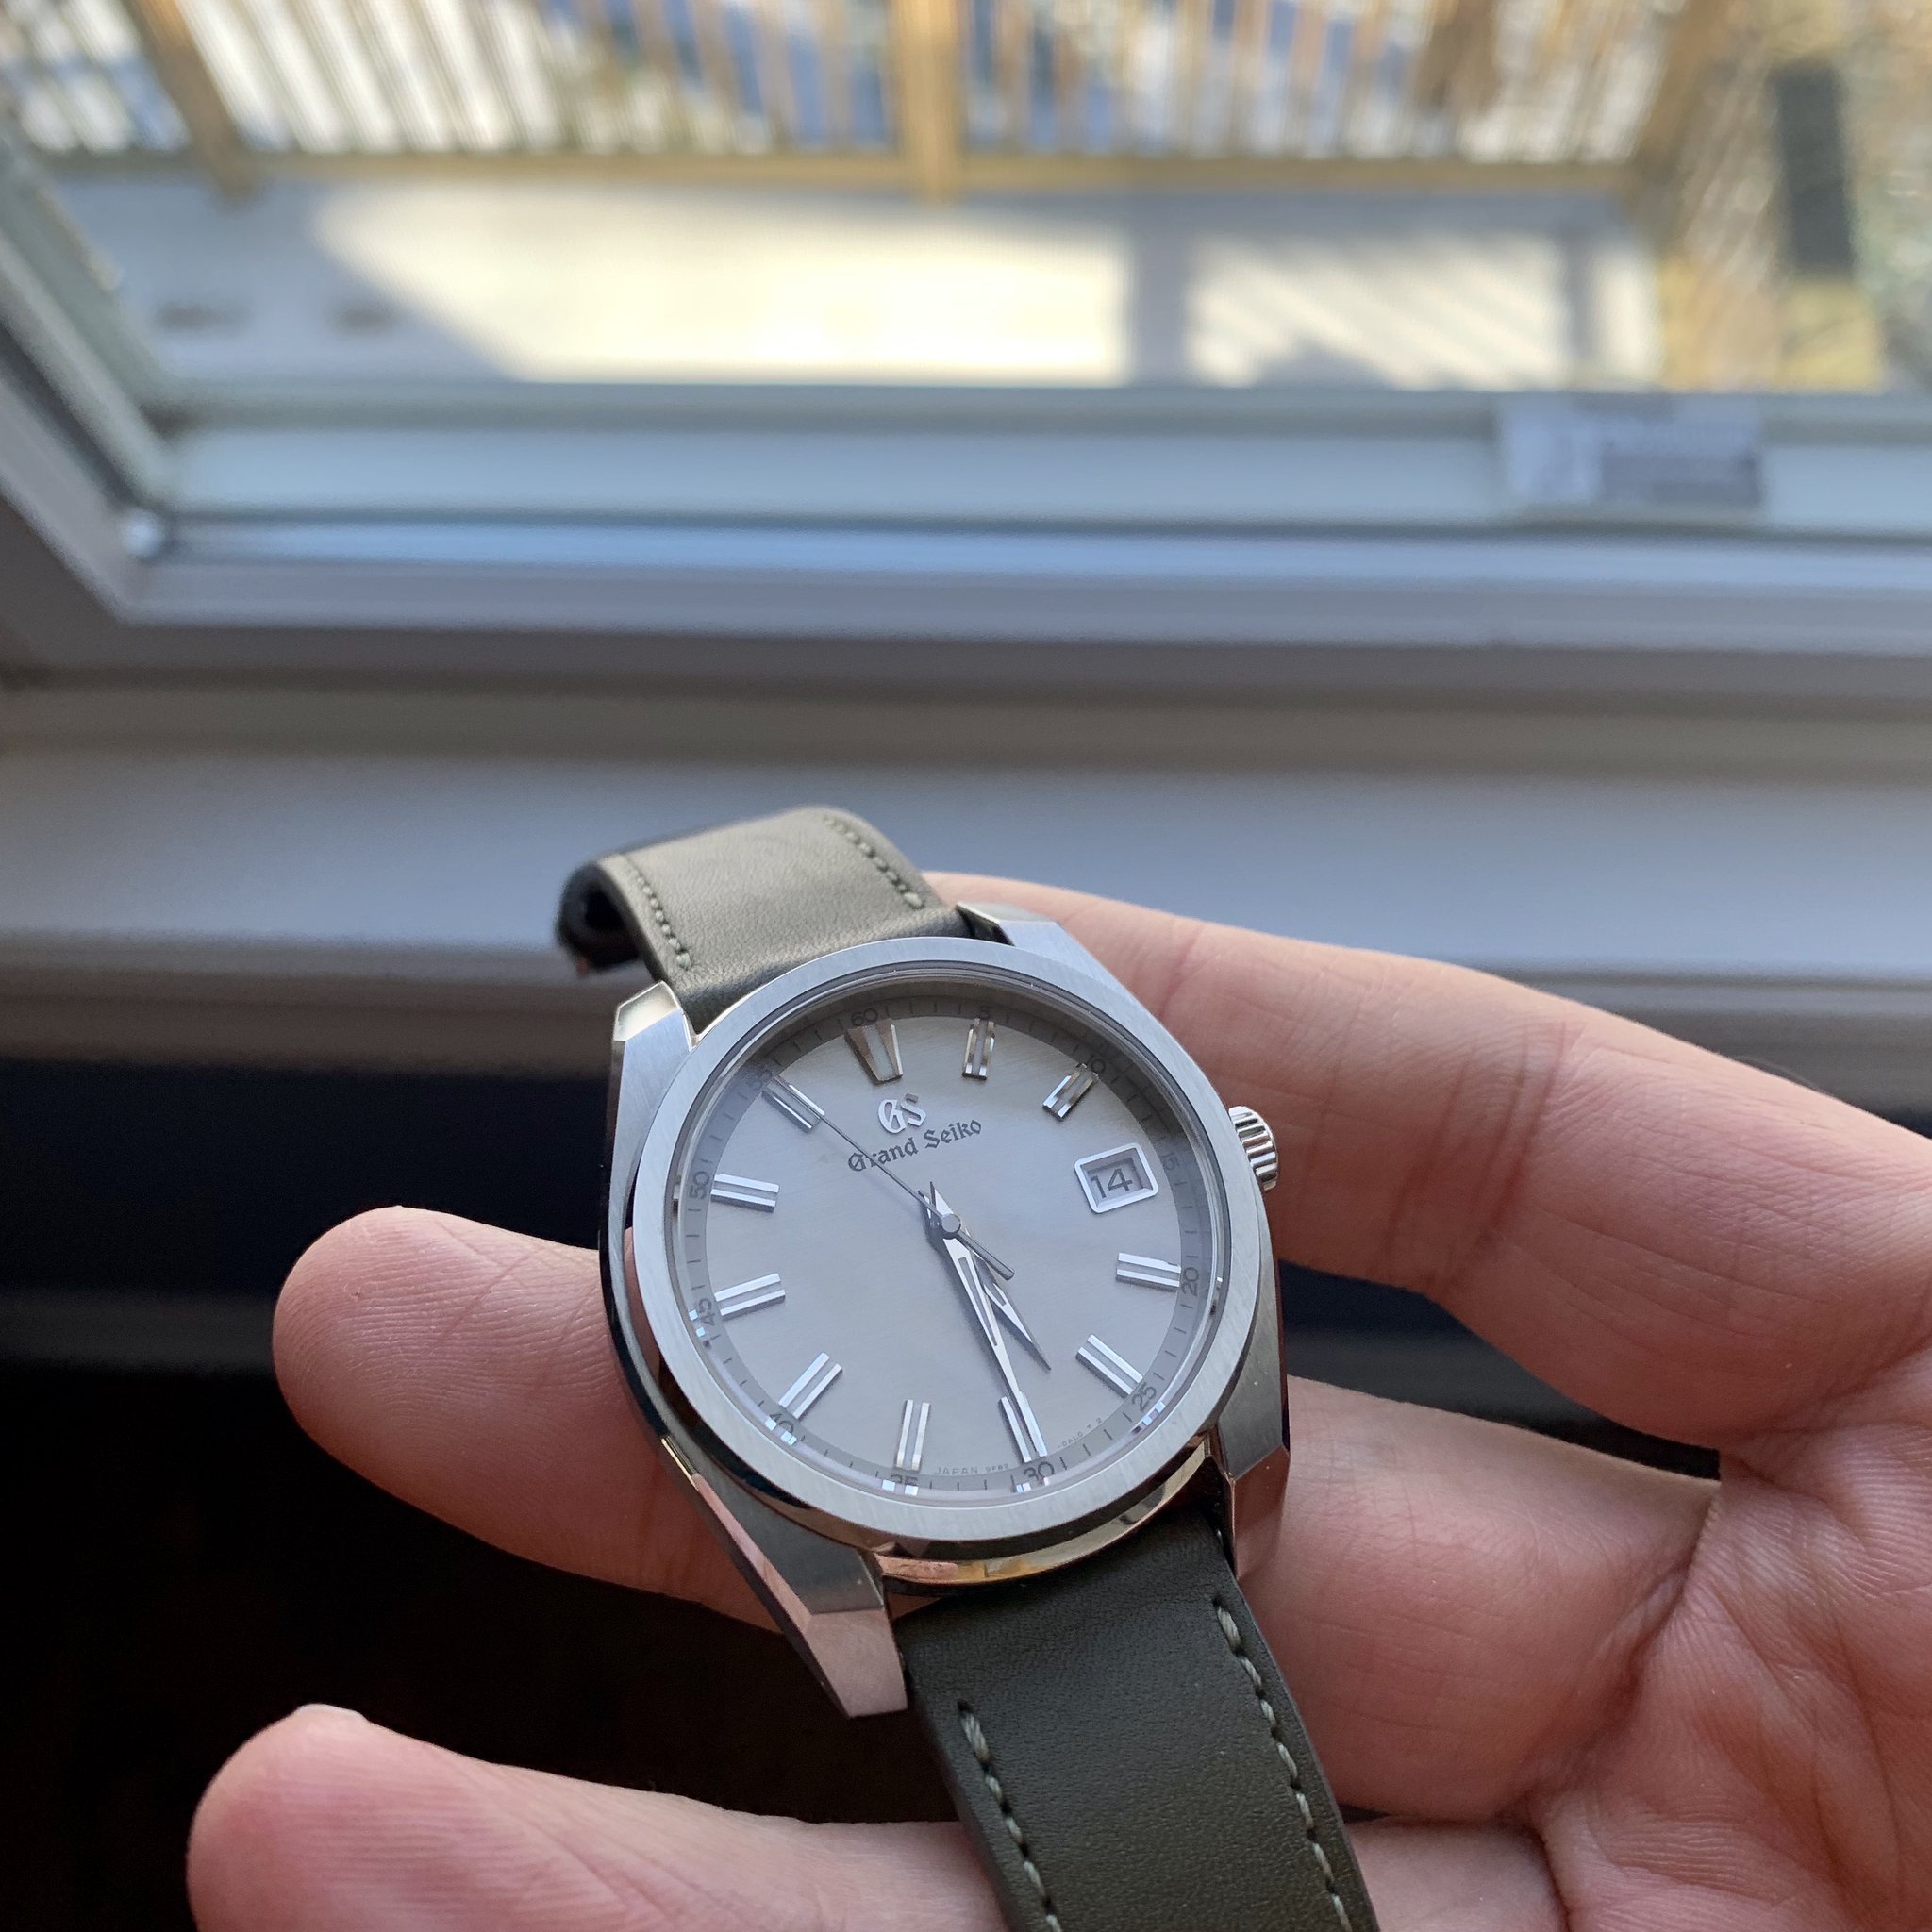 Recollection millimeter Uafhængighed FS: Grand Seiko SBGV245 9f JDM | WatchUSeek Watch Forums